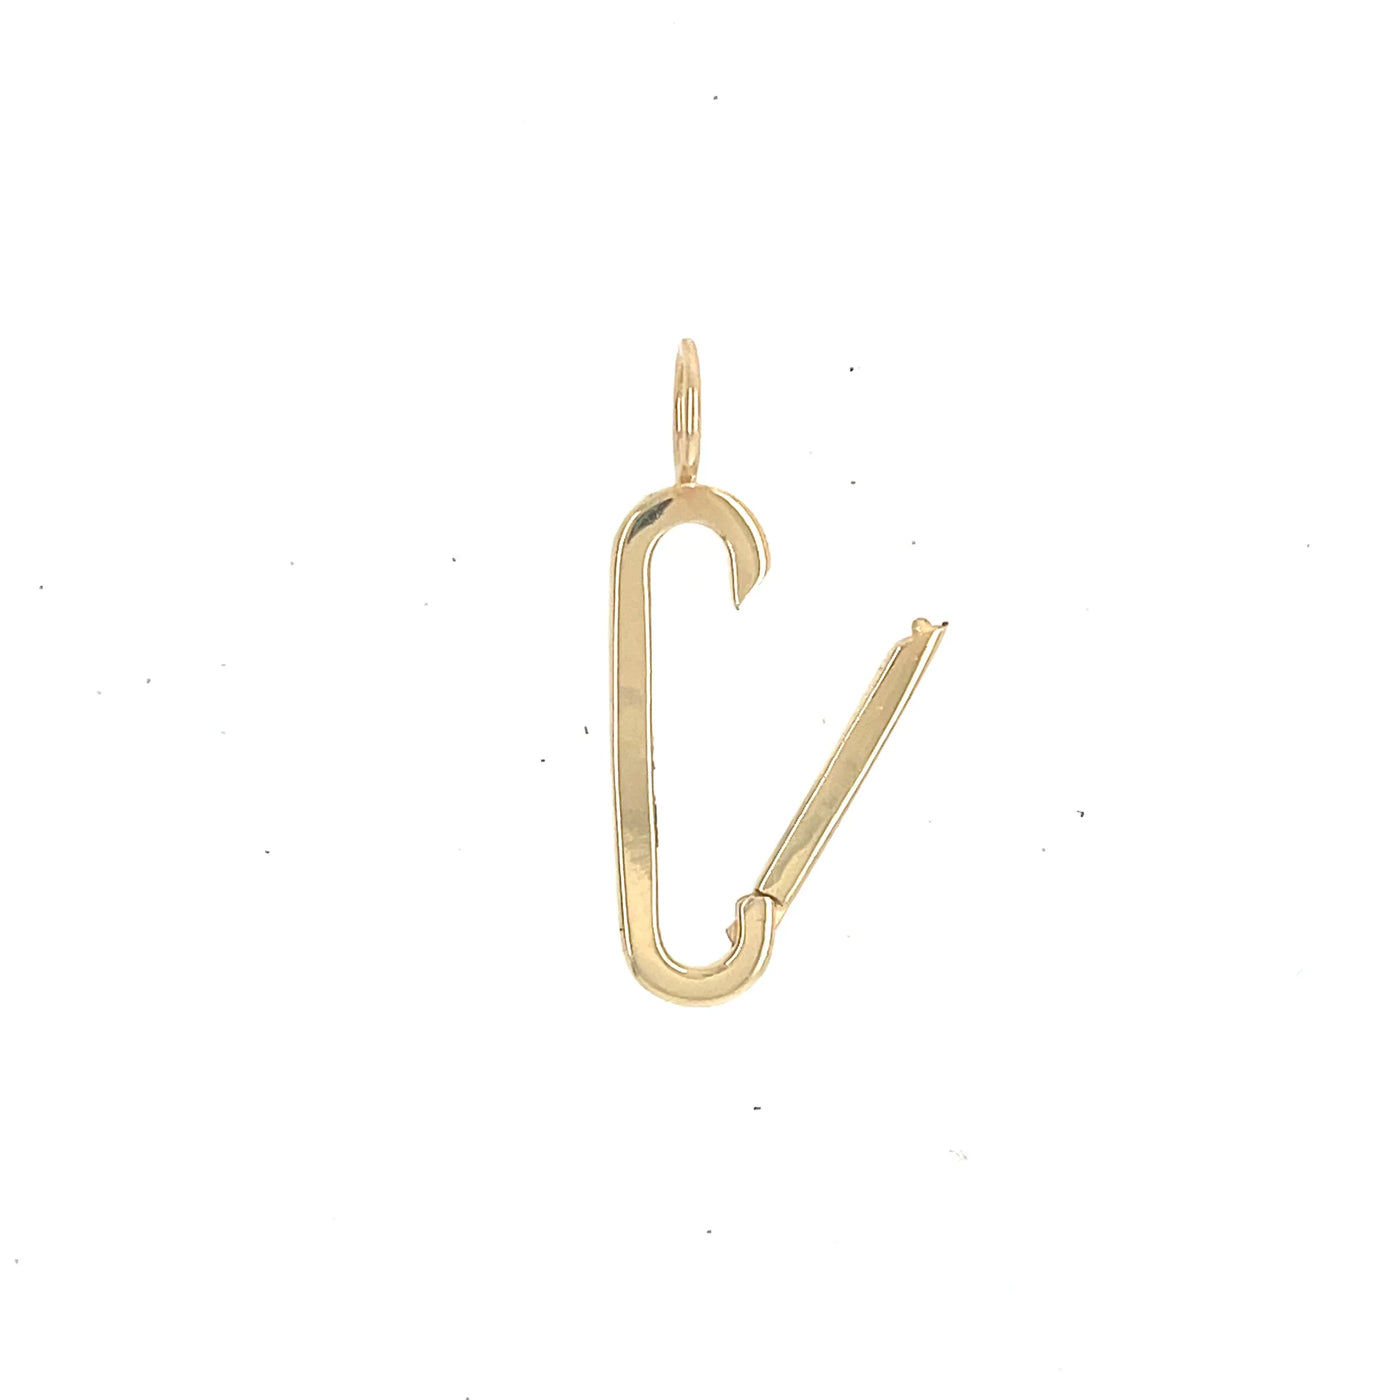 14k yellow gold clicker hinge bail charm extender oval paperclip